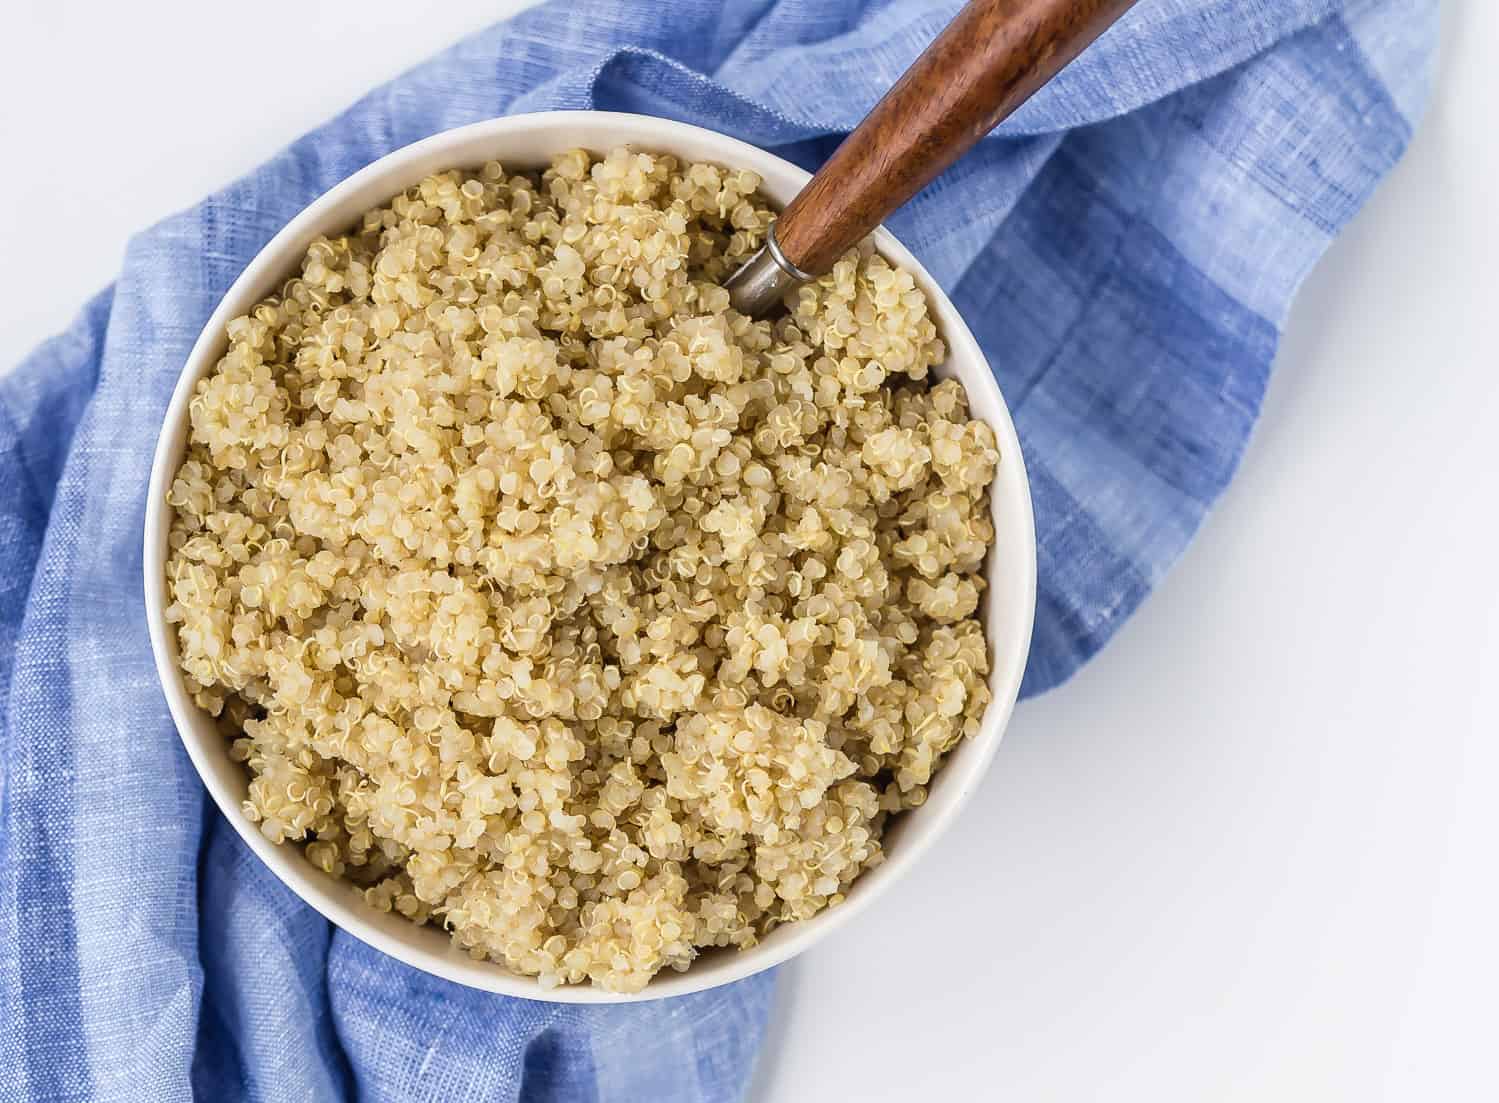 Cooked quinoa in a bowl with a wooden spoon.